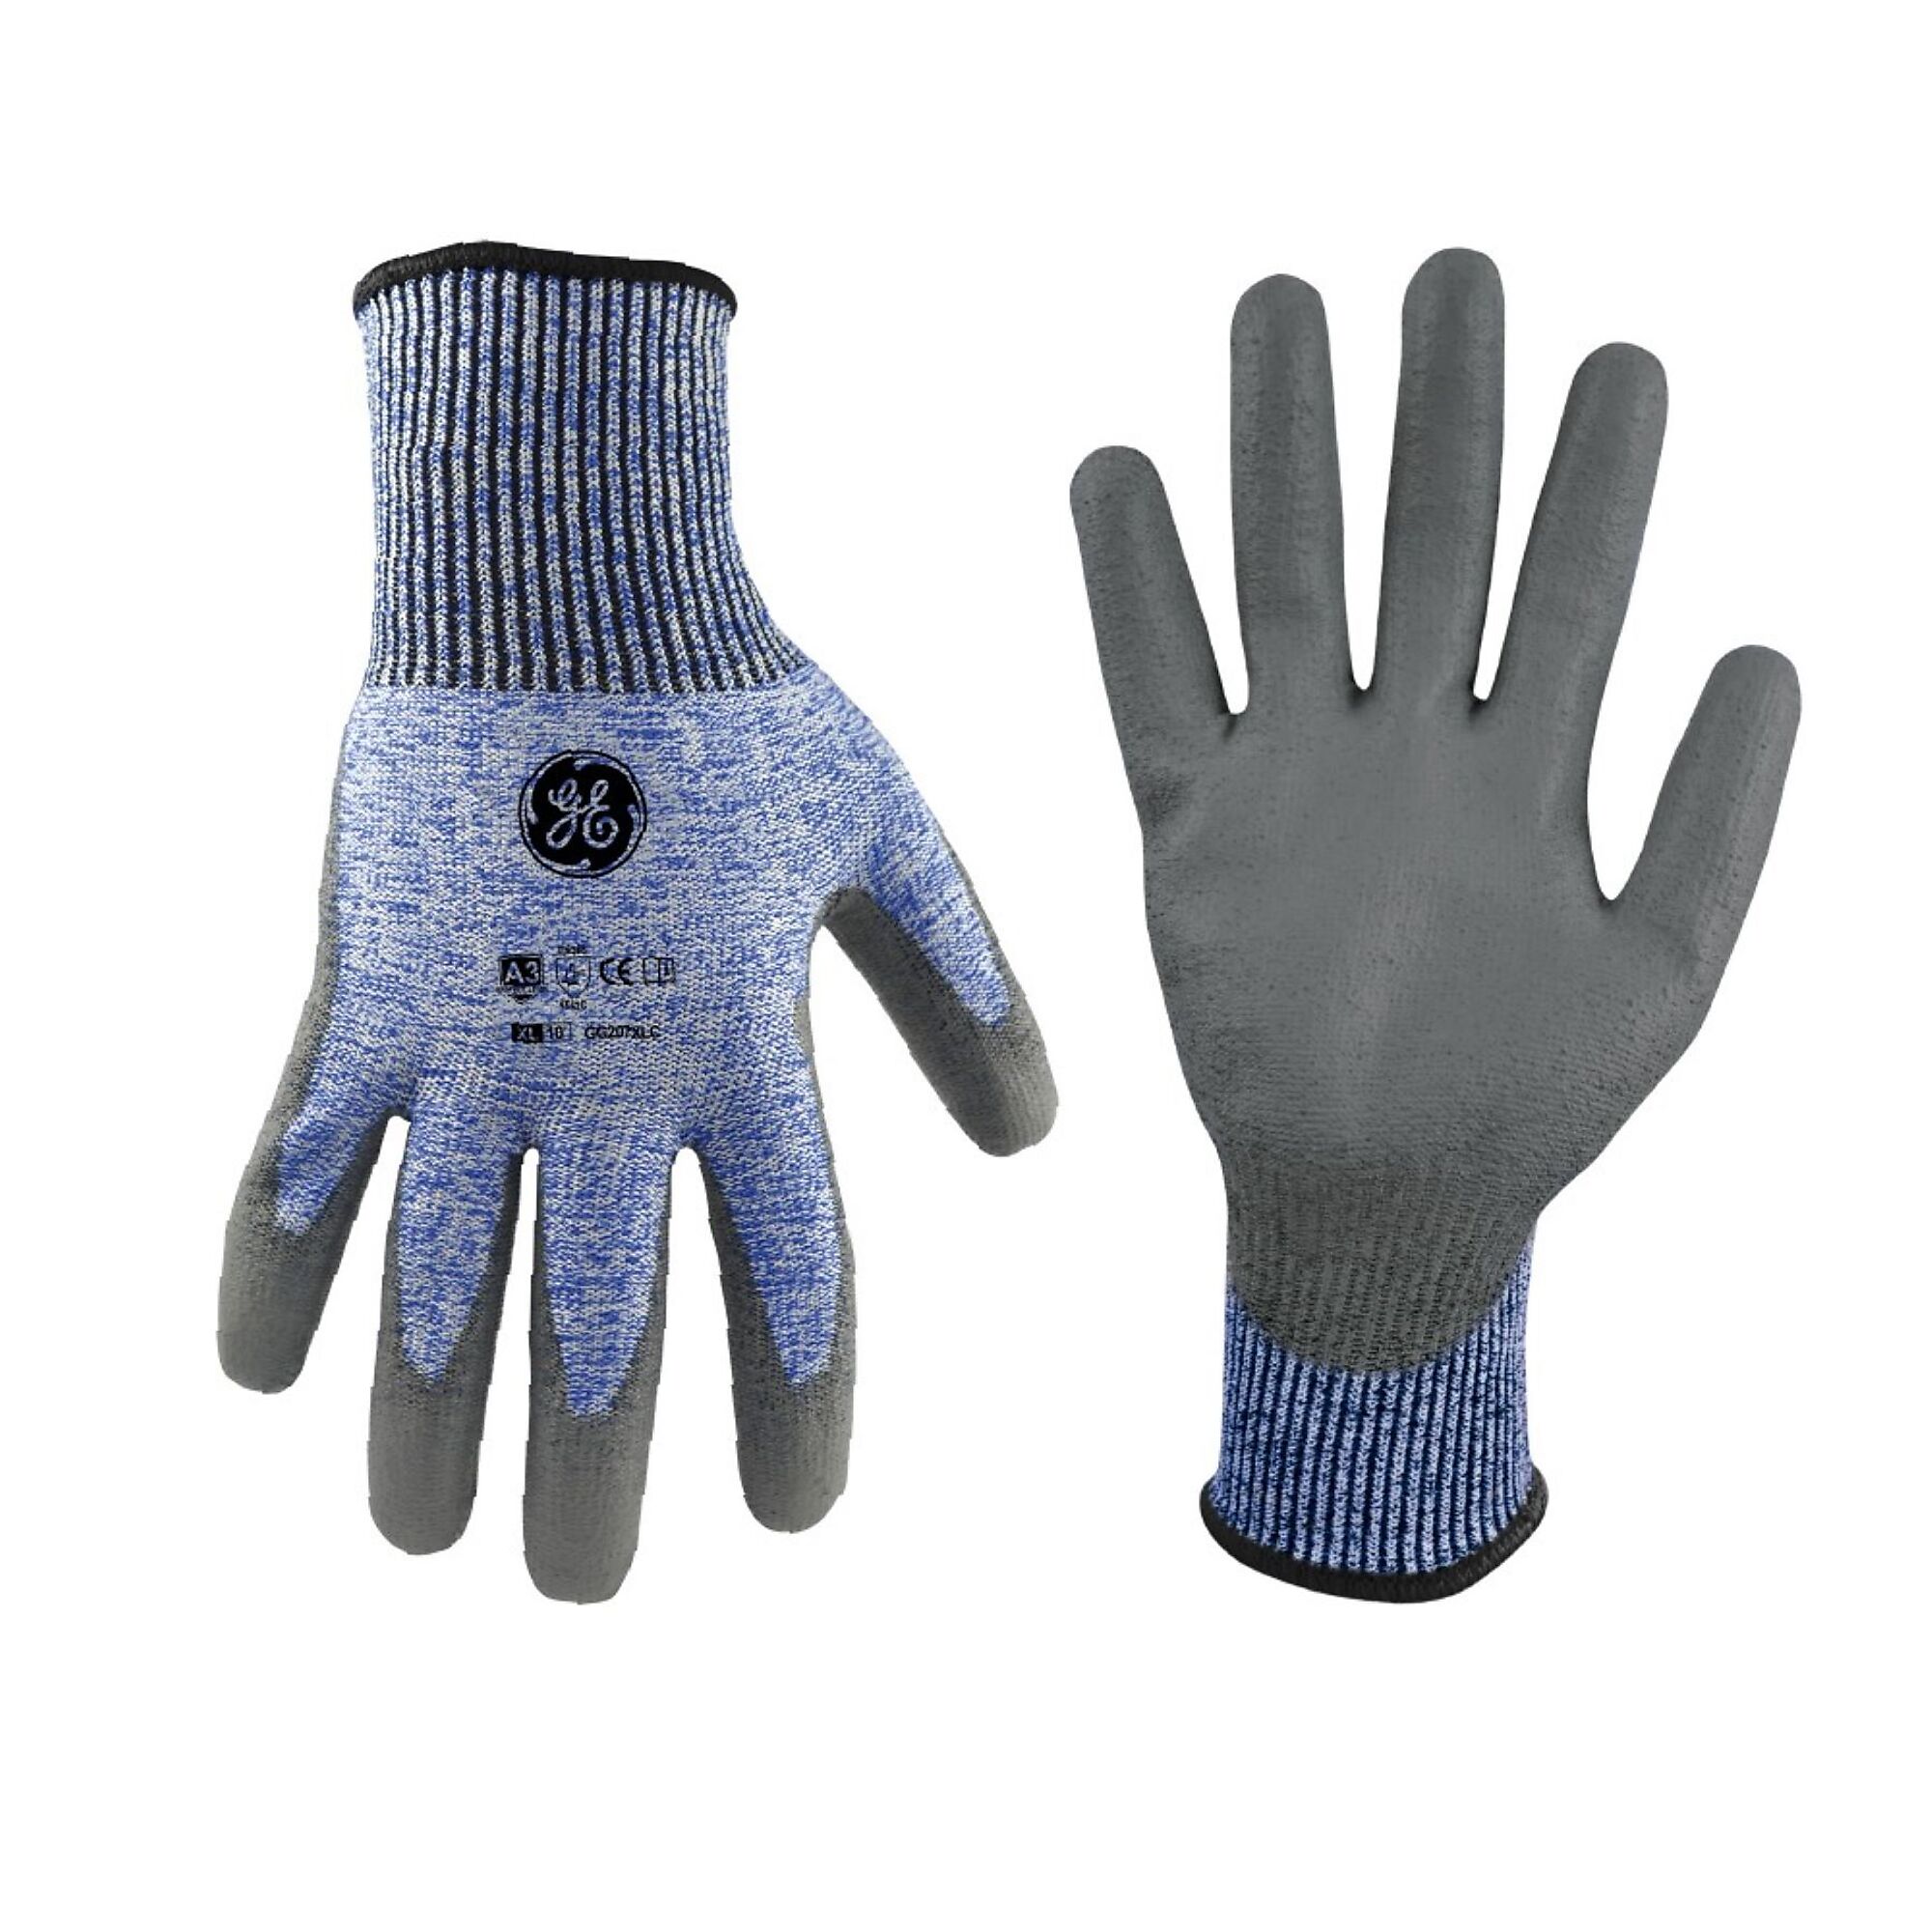 General Electric, Unisex Dipped Gloves Blue/Gray XL 12 pair, Size XL, Included (qty.) 12, Model GG207XL